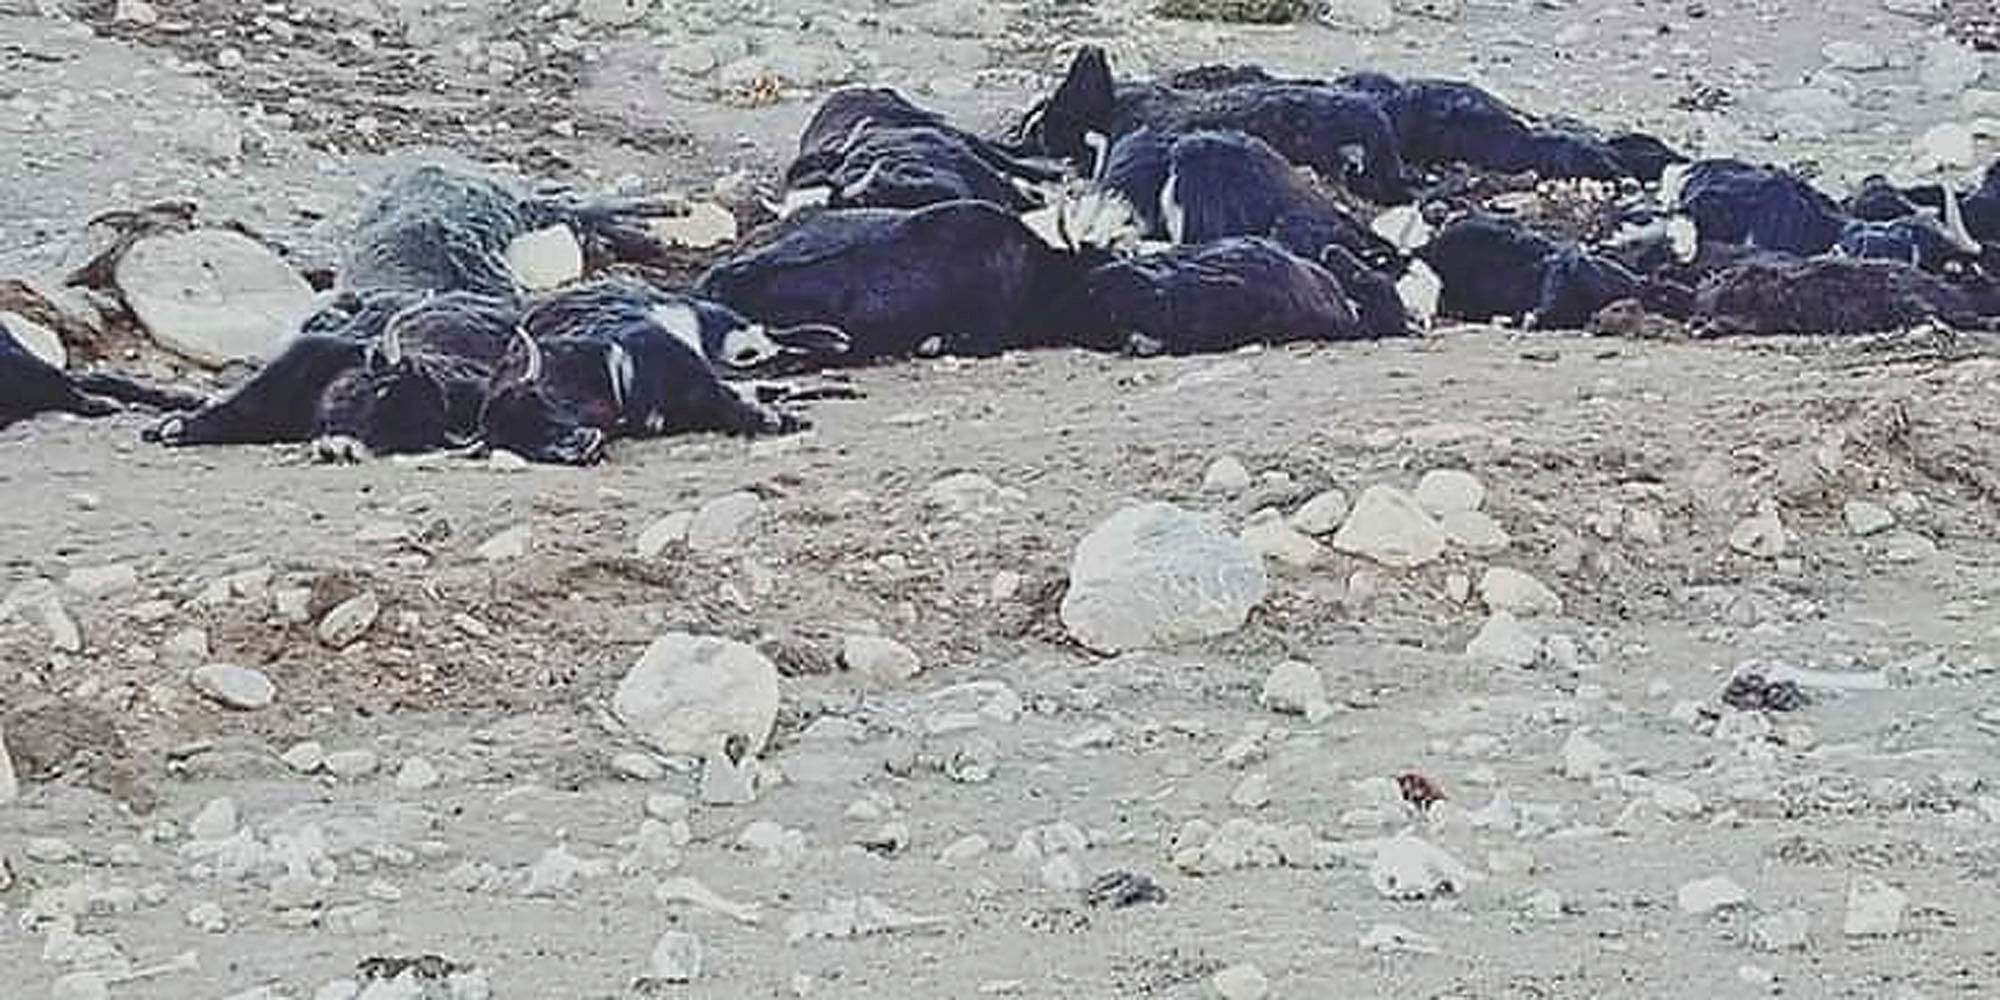 Corpses of Himalayan yaks in northern Sikkim.